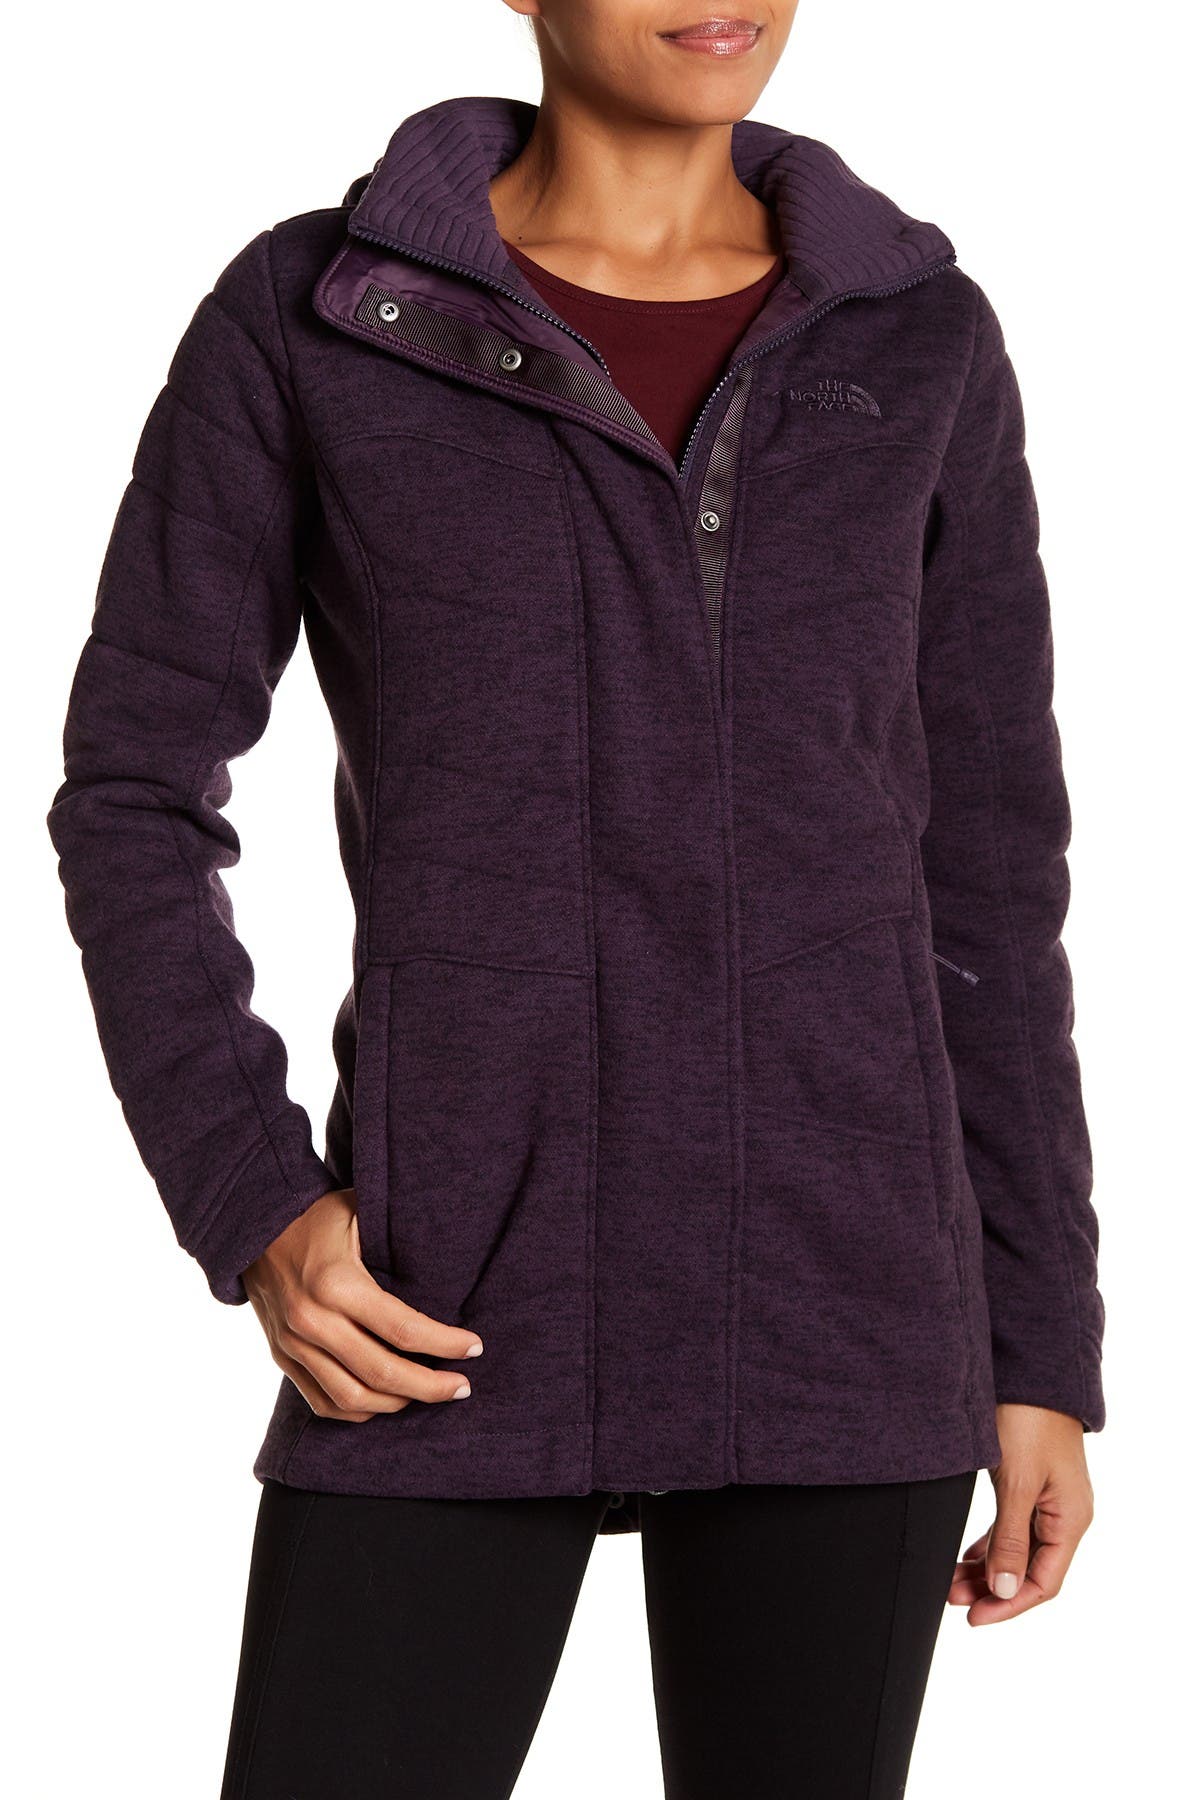 north face indi insulated hoodie